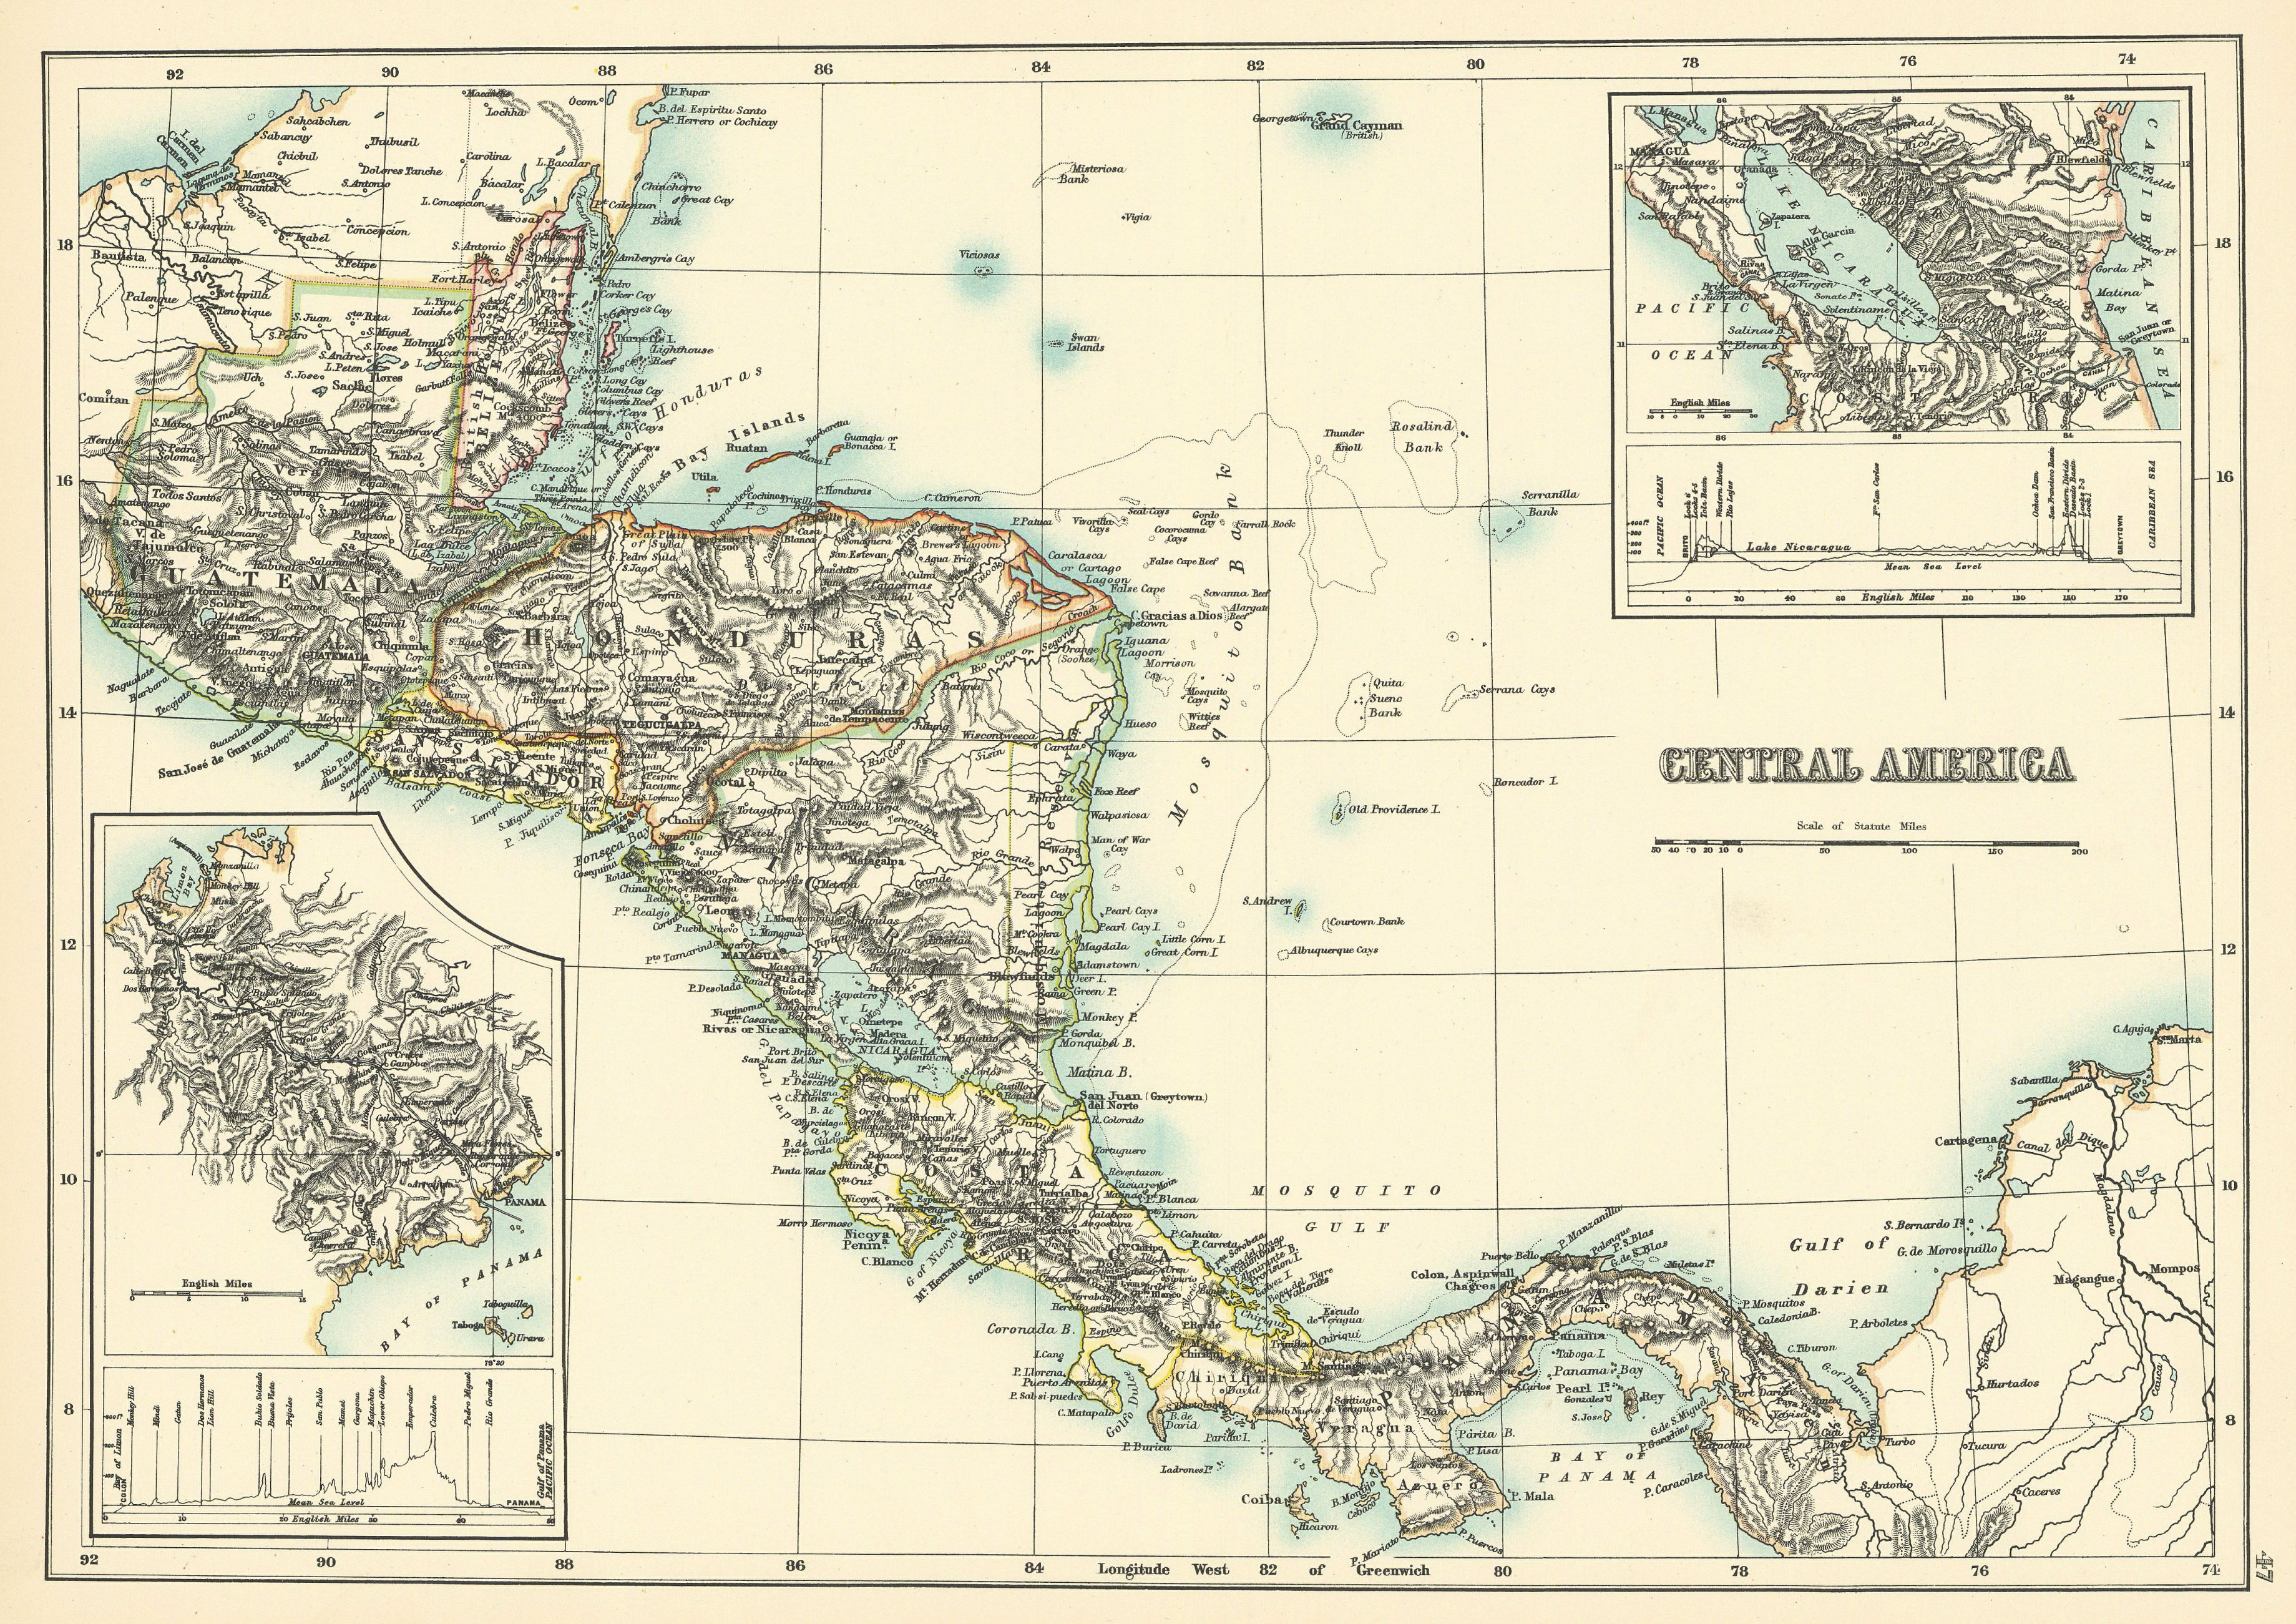 Associate Product Central America. Panama Canal 16 yrs before completion. BARTHOLOMEW 1898 map